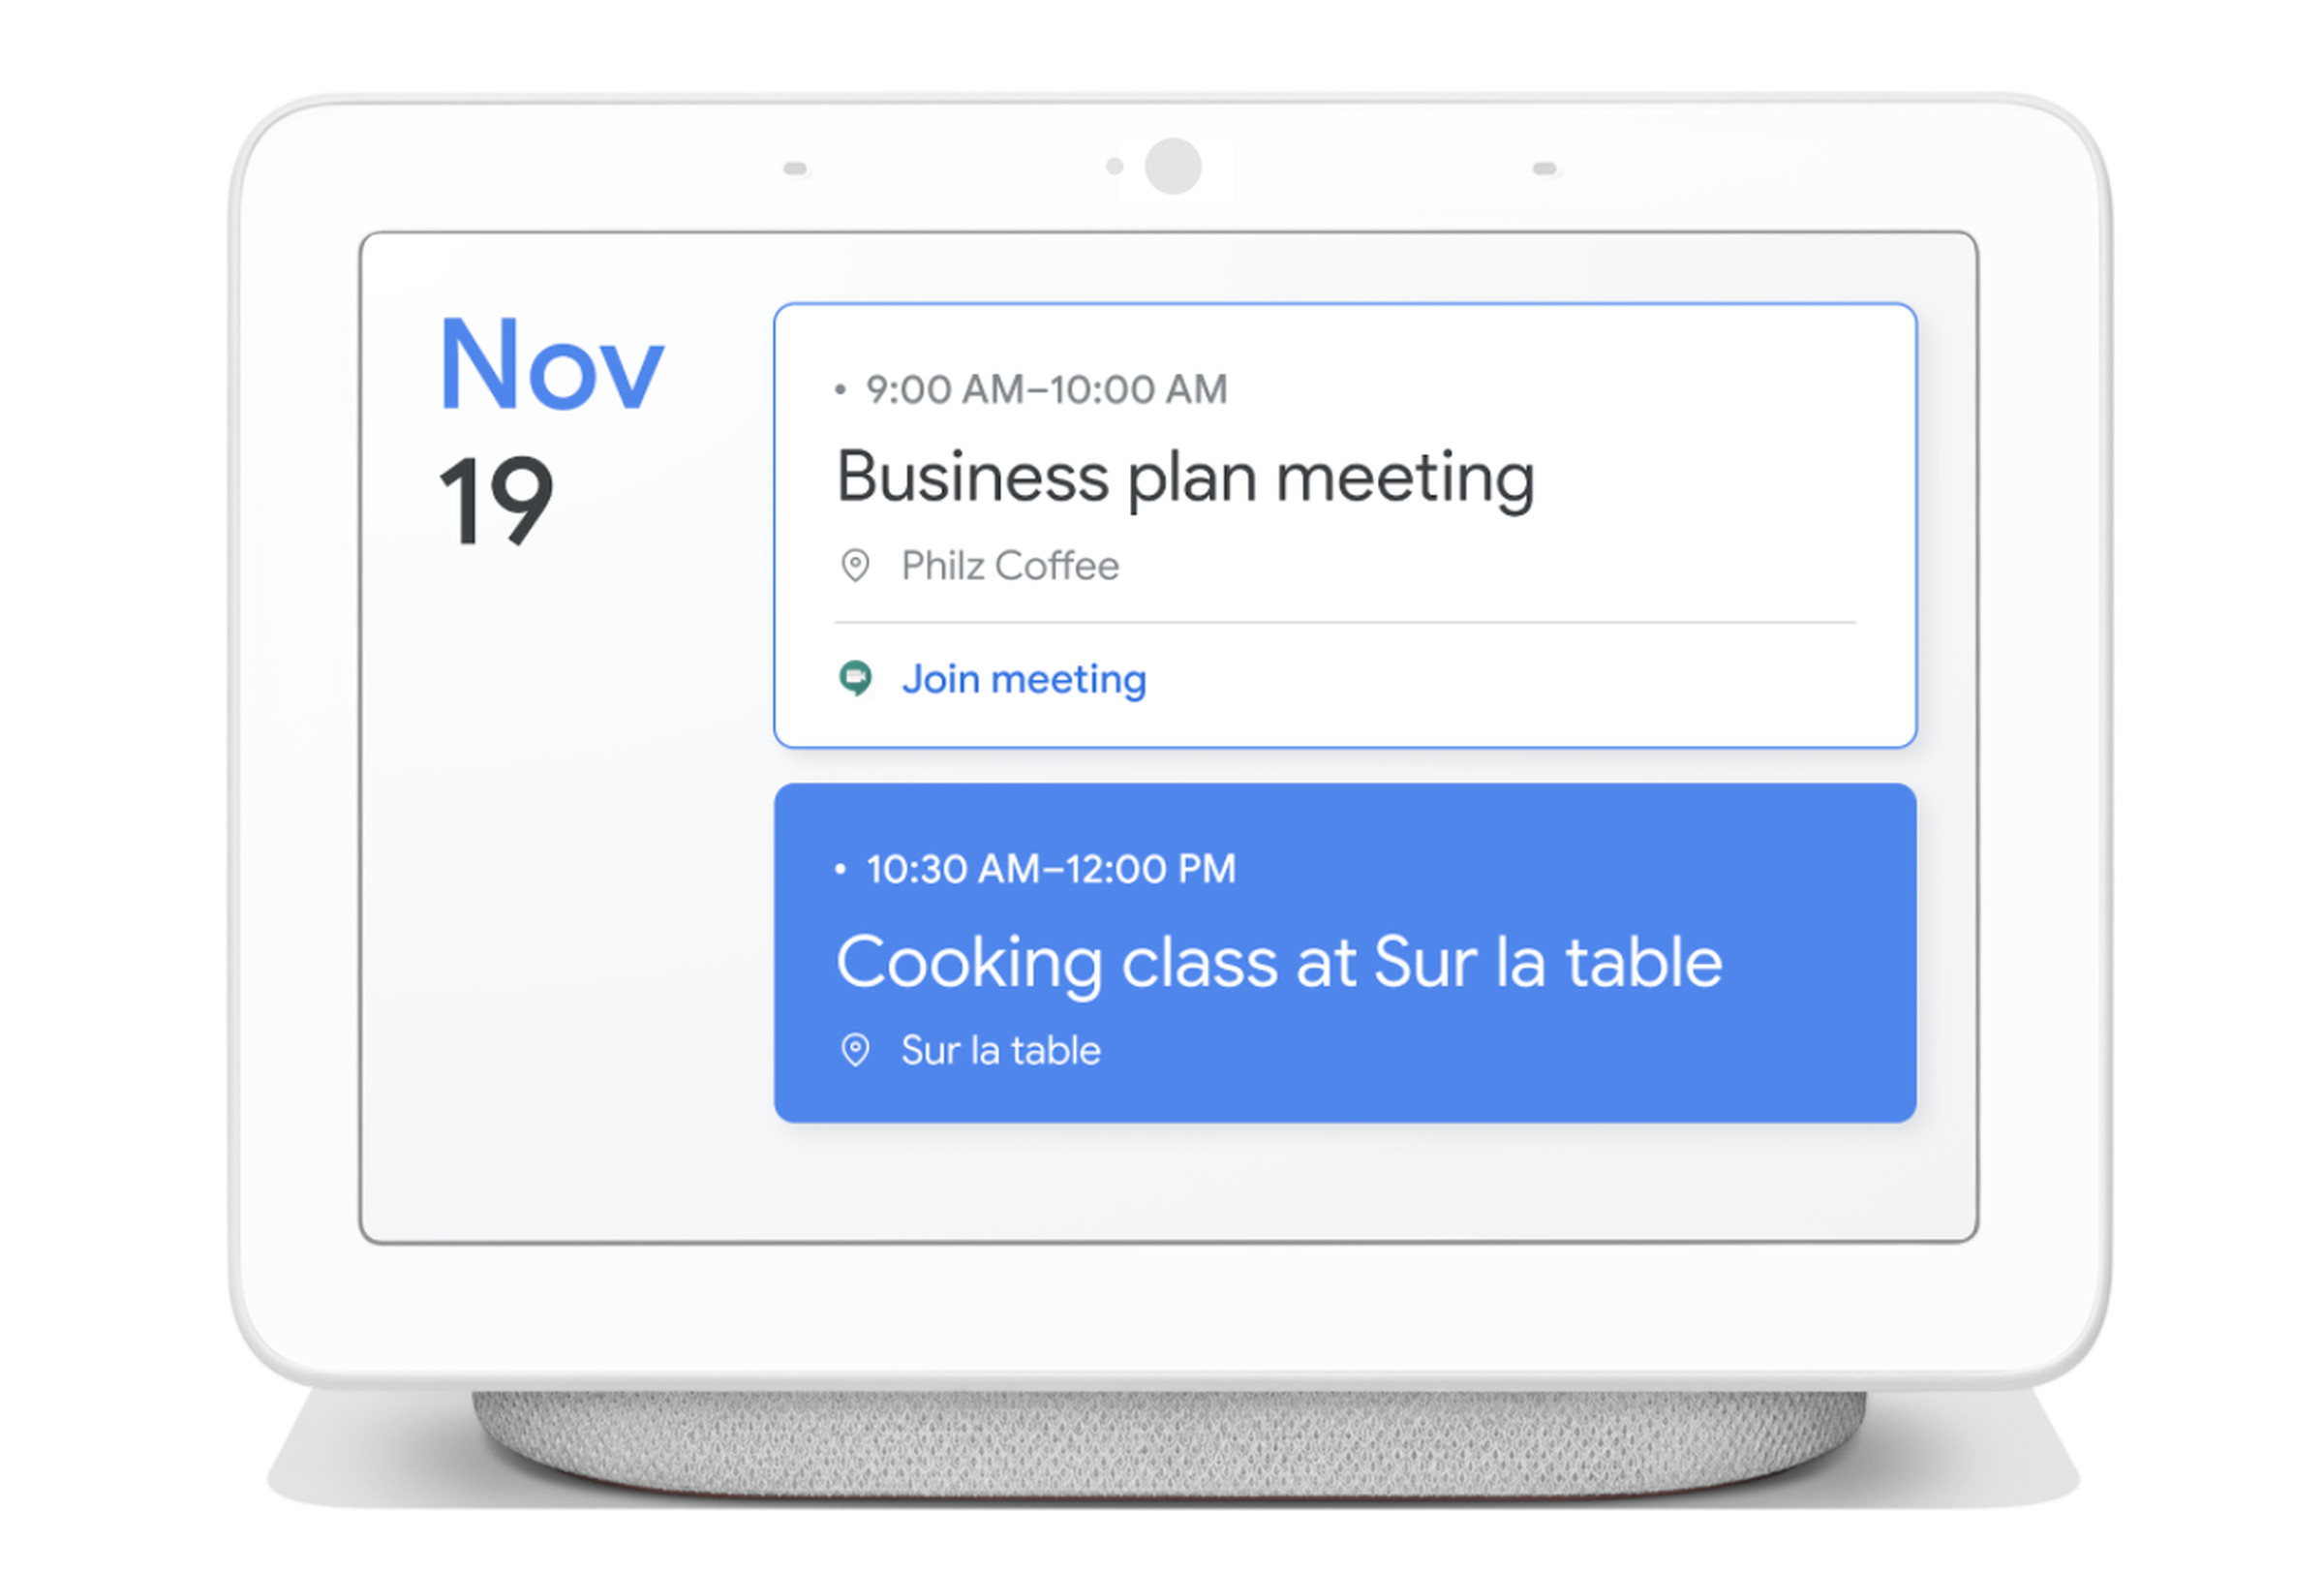 You will now be able to access calendar entries from multiple Google accounts at the same time.